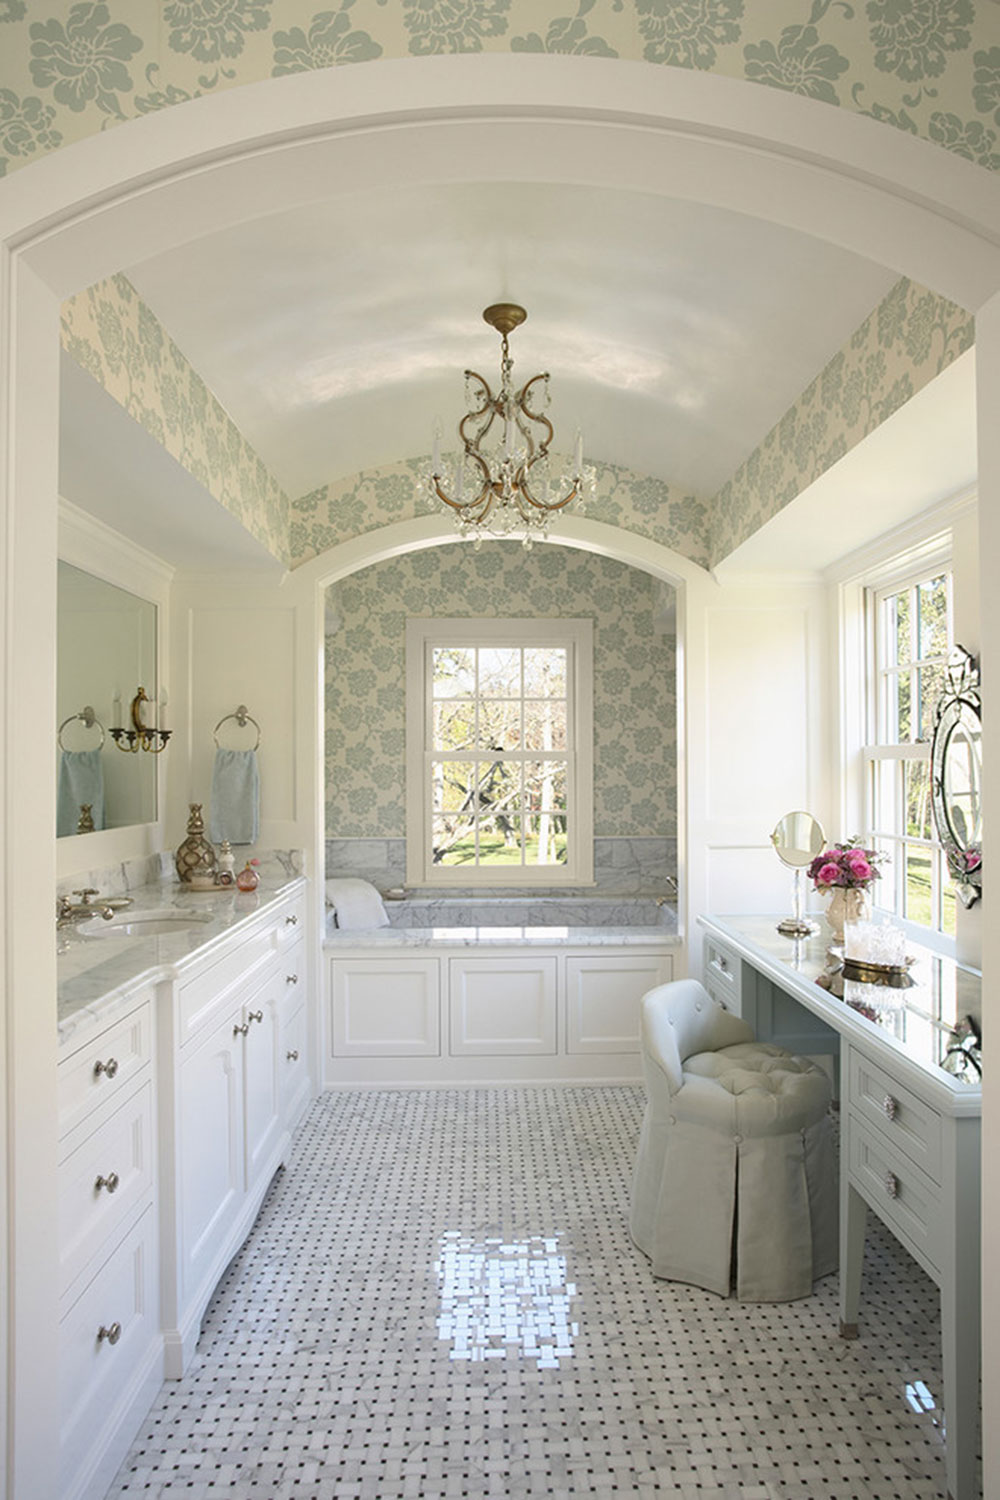 Styling your bathroom should be a priority5 Styling your bathroom should be a priority